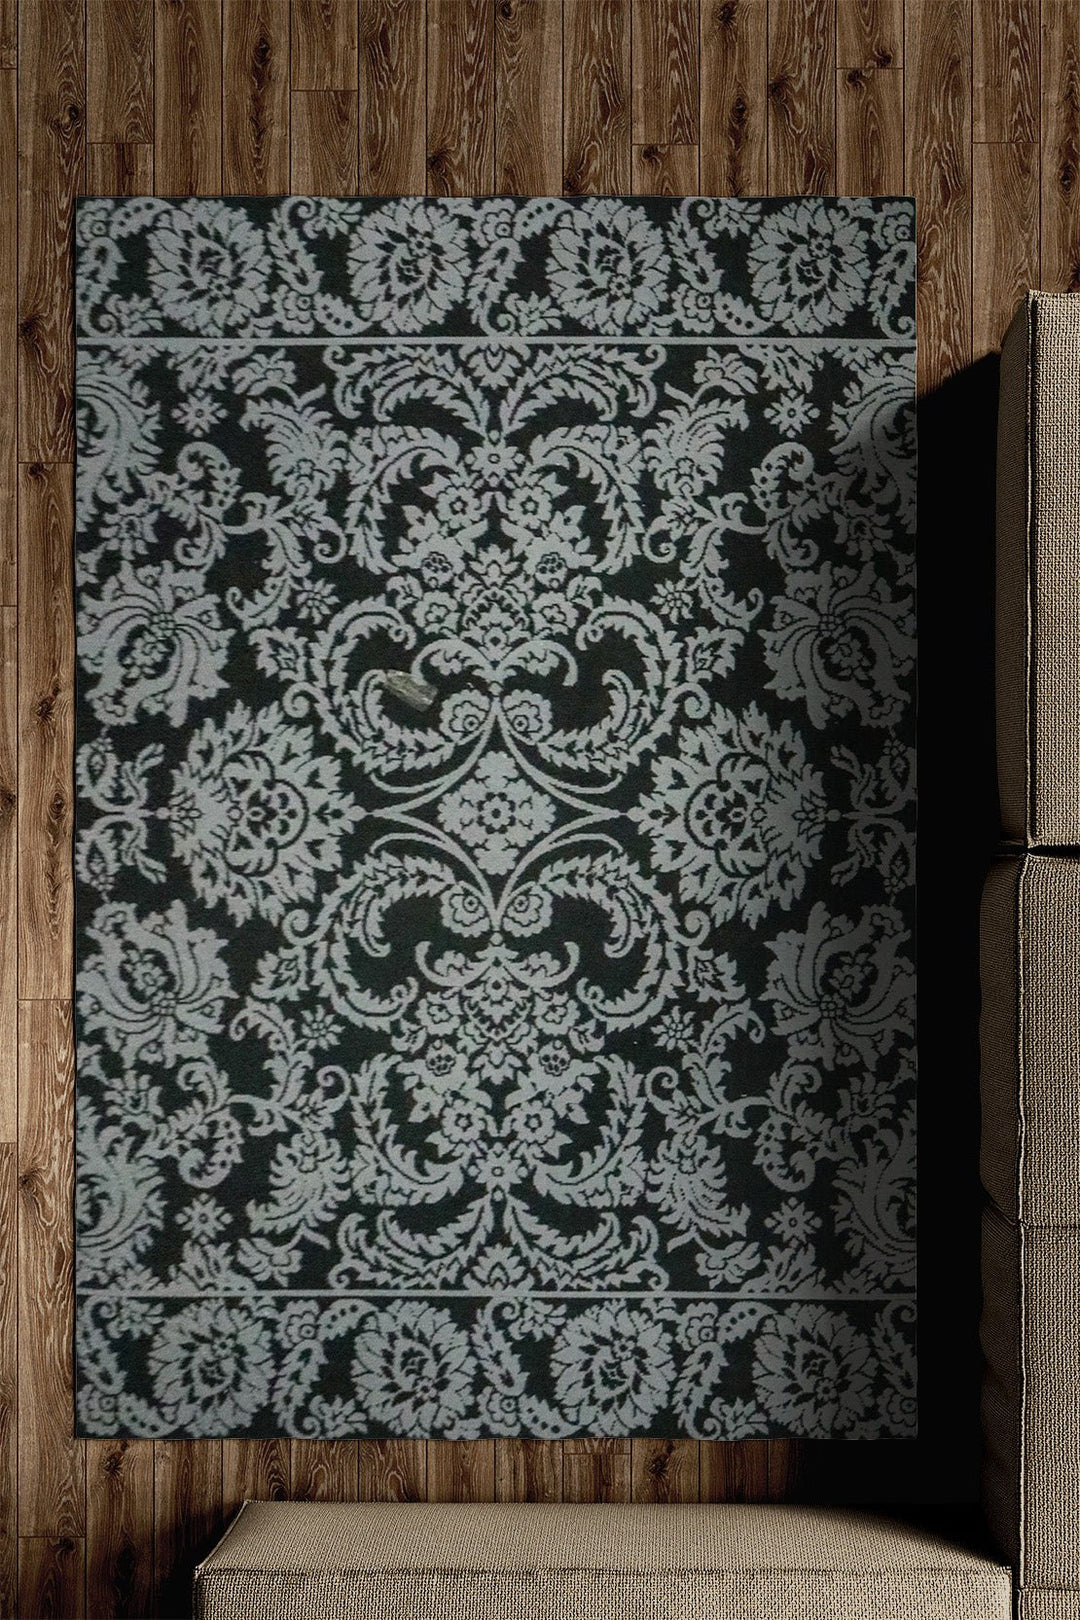 Turkish Modern Festival WD Rug - 5.2 x 7.5 FT - Gray - Sleek and Minimalist for Chic Interiors - V Surfaces